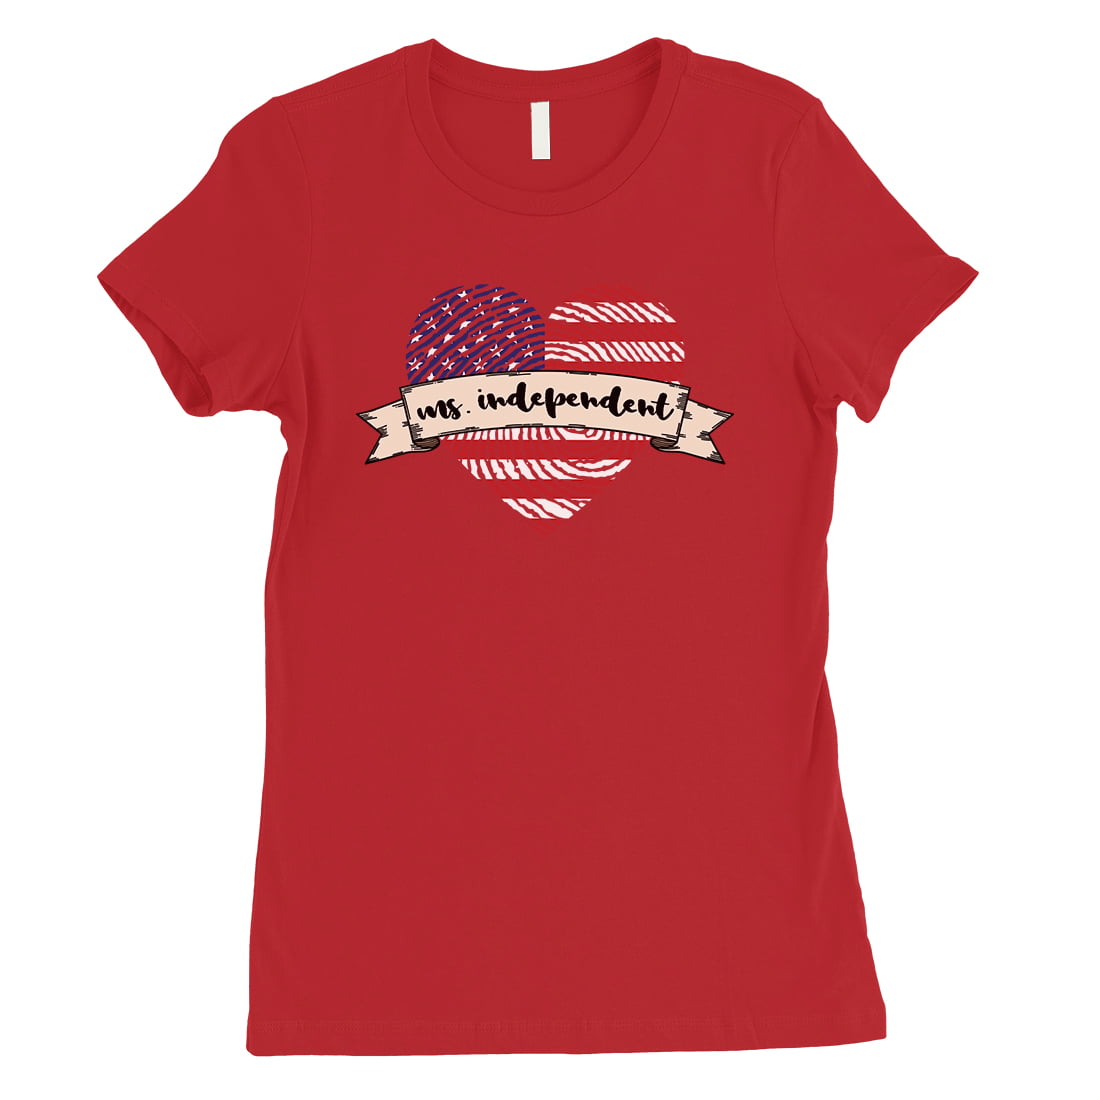 Ms Independent Shirt Womens Red T-Shirt Cute 4th of July Outfit ...